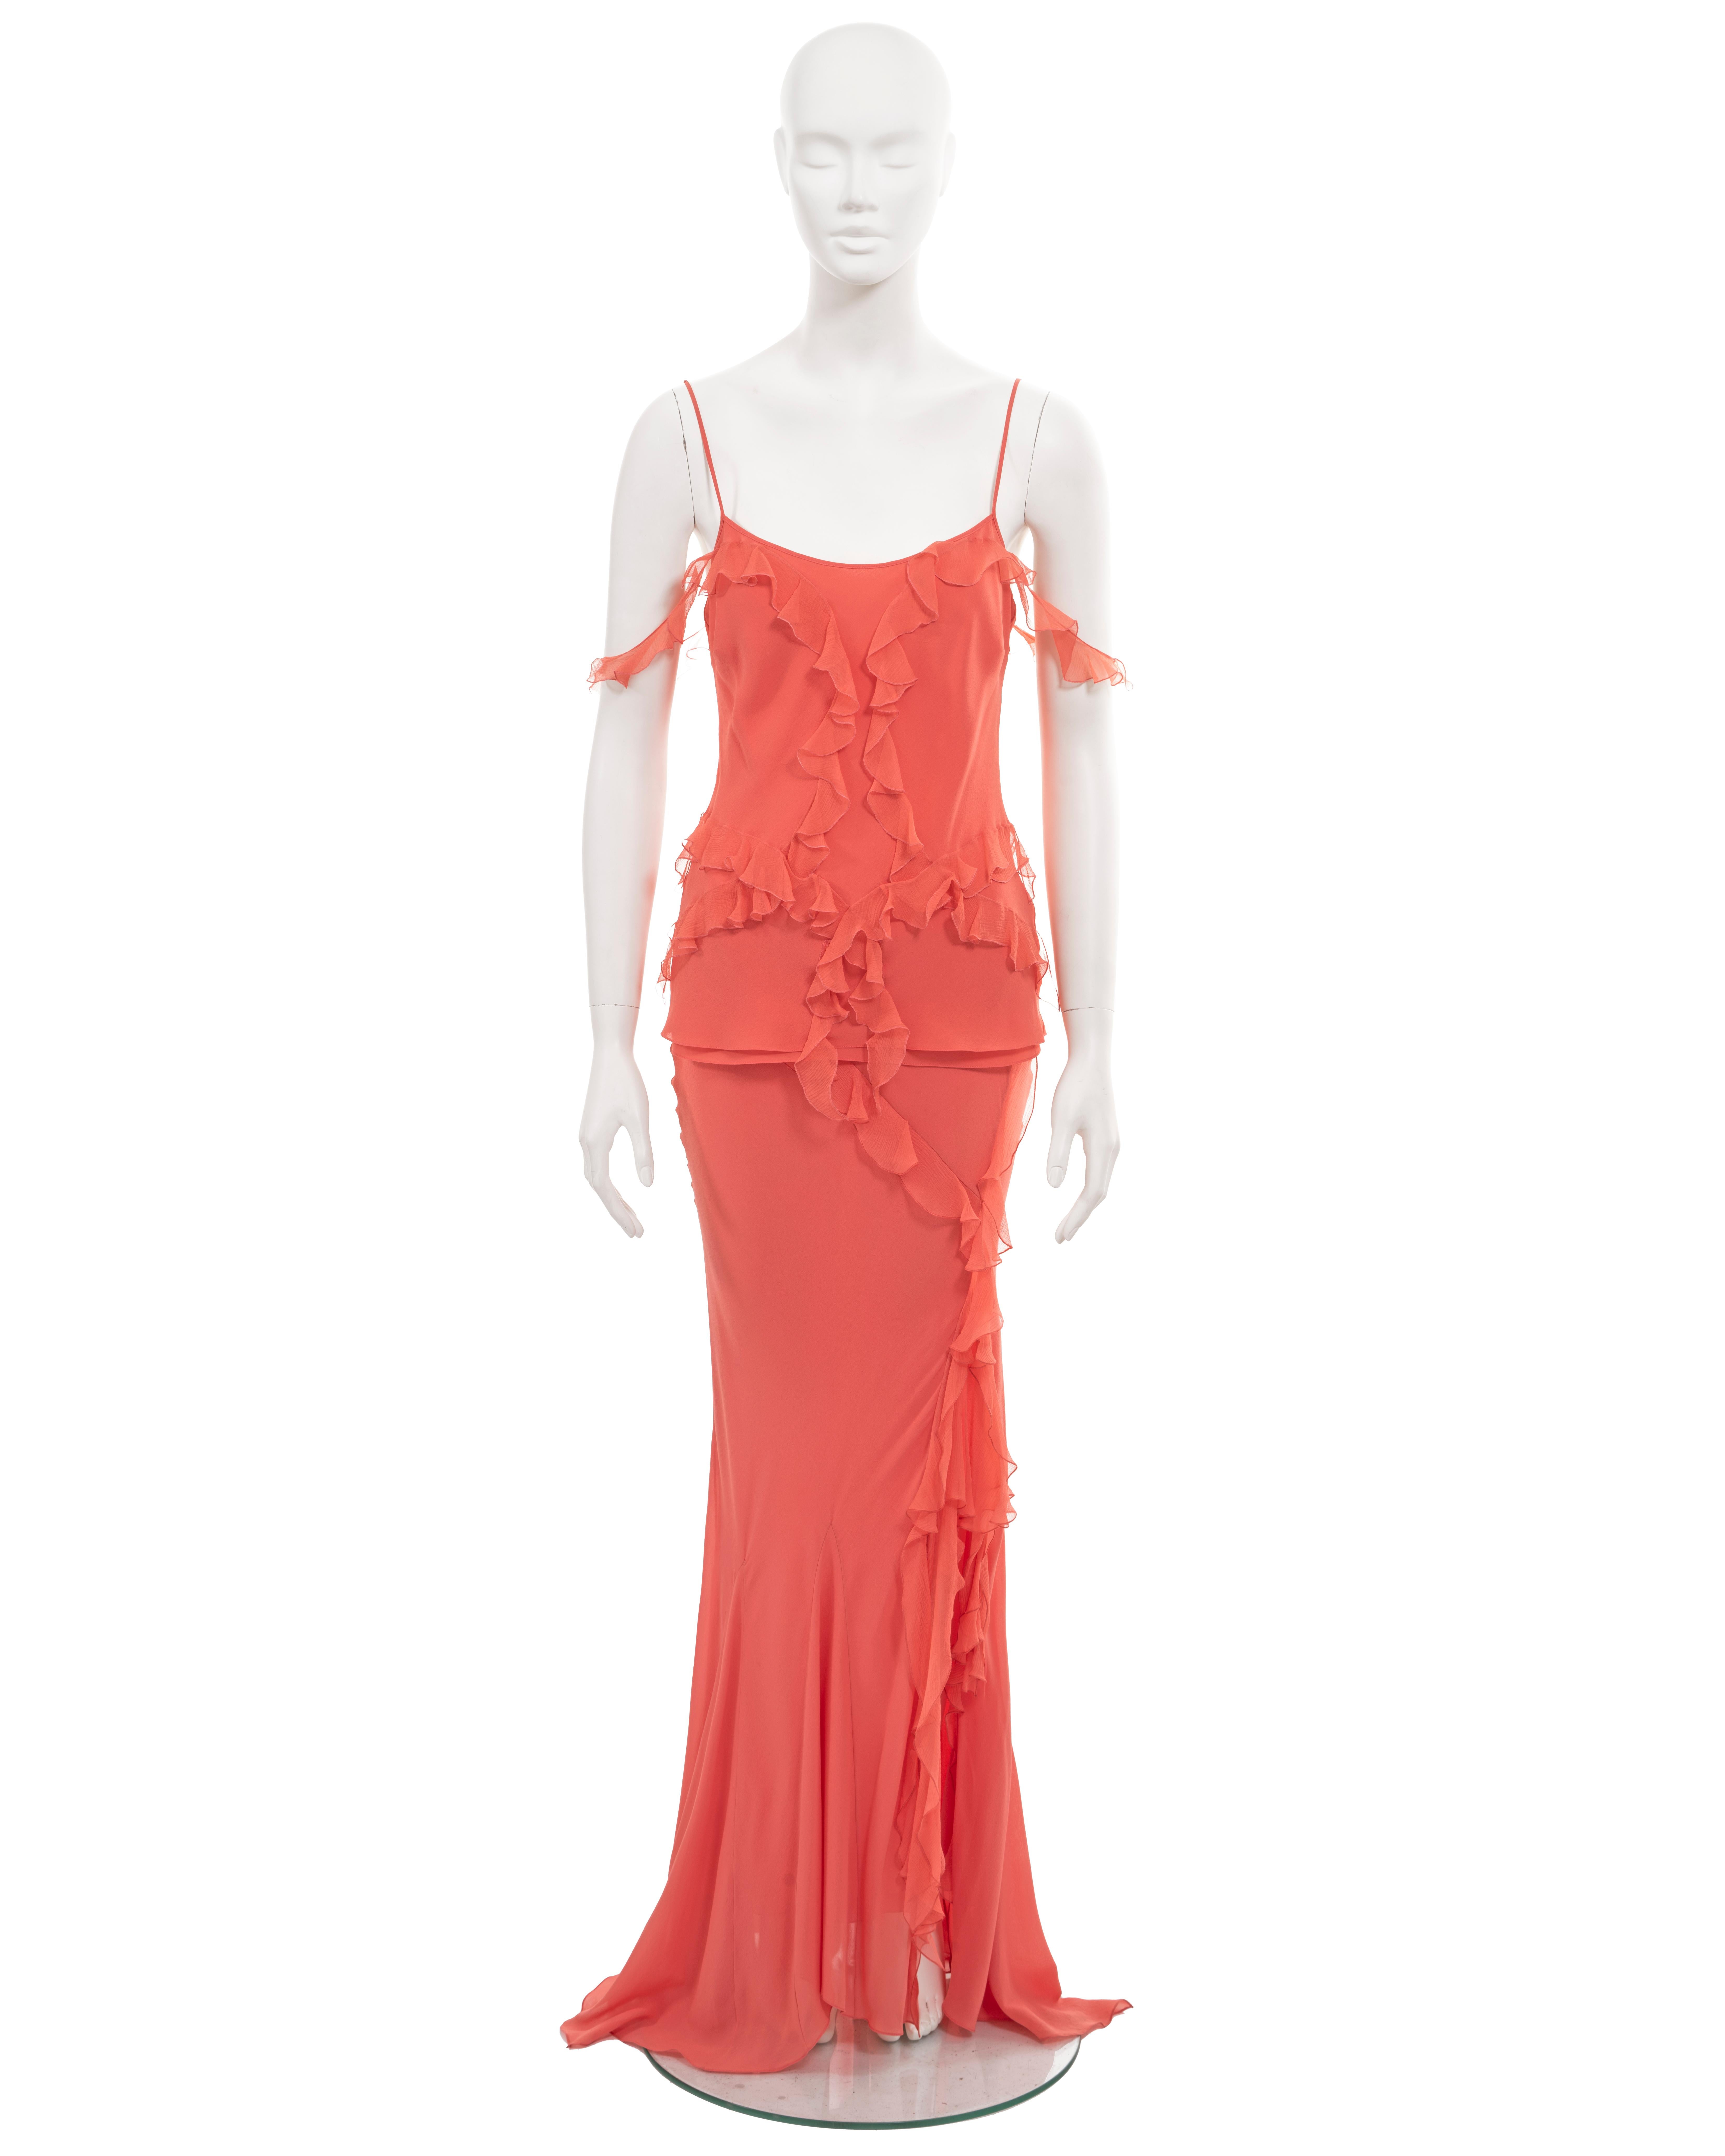 ▪ Christian Dior evening skirt and top set
▪ Creative Director: John Galliano
▪ Sold by One of a Kind Archive
▪ Fall-Winter 2004
▪ Coral silk chiffon 
▪ Ruffled trimmings 
▪ Spaghetti strap vest top with two off-shoulder straps 
▪ Floor-length skirt